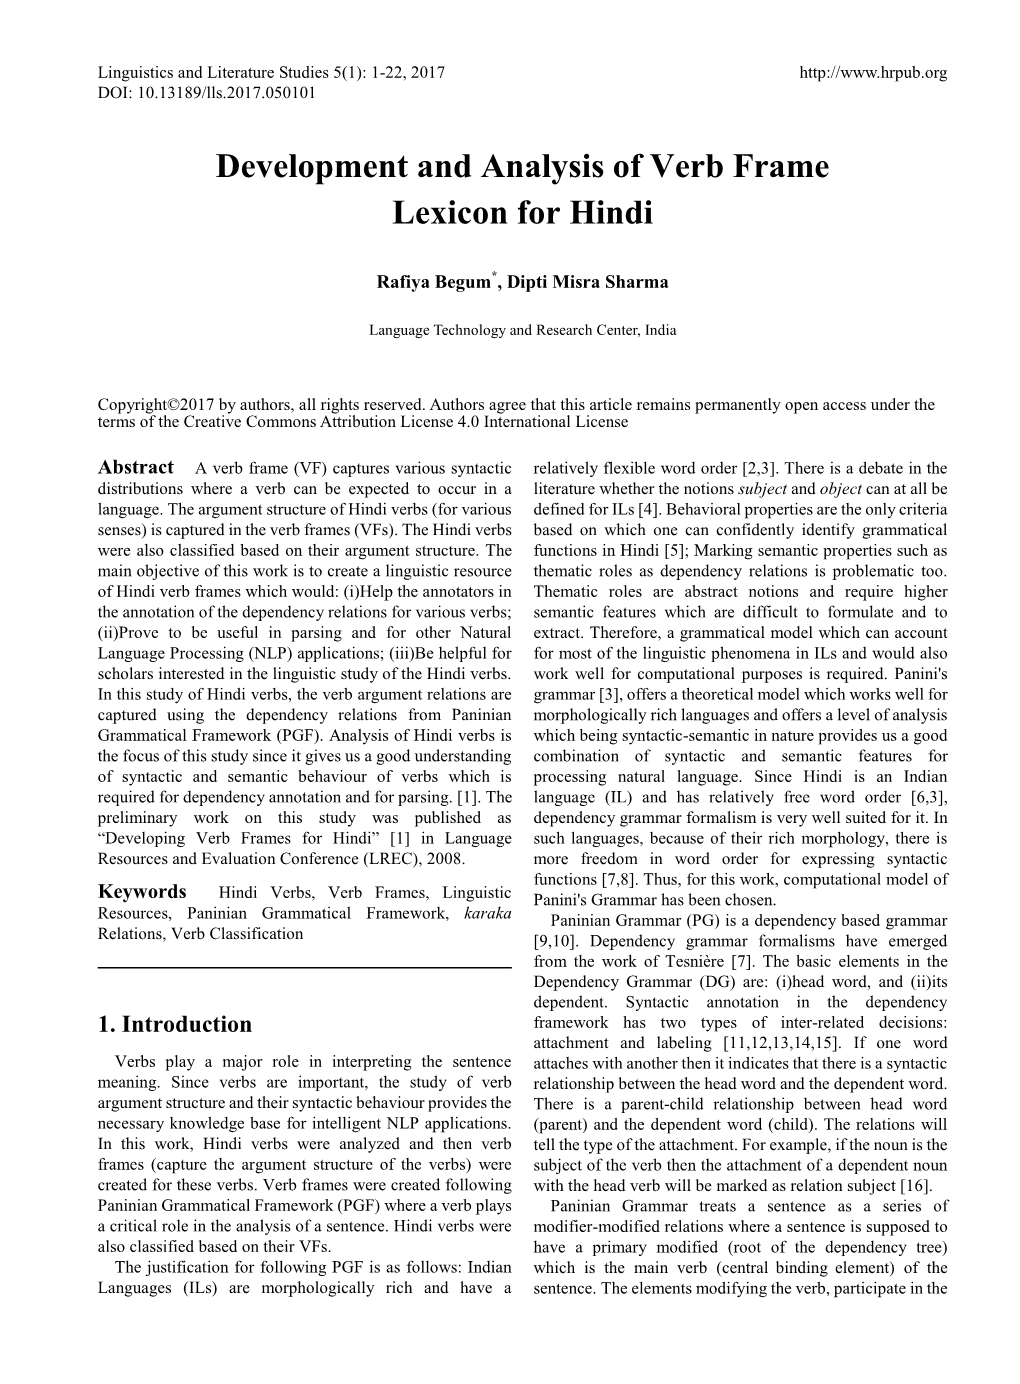 Development and Analysis of Verb Frame Lexicon for Hindi